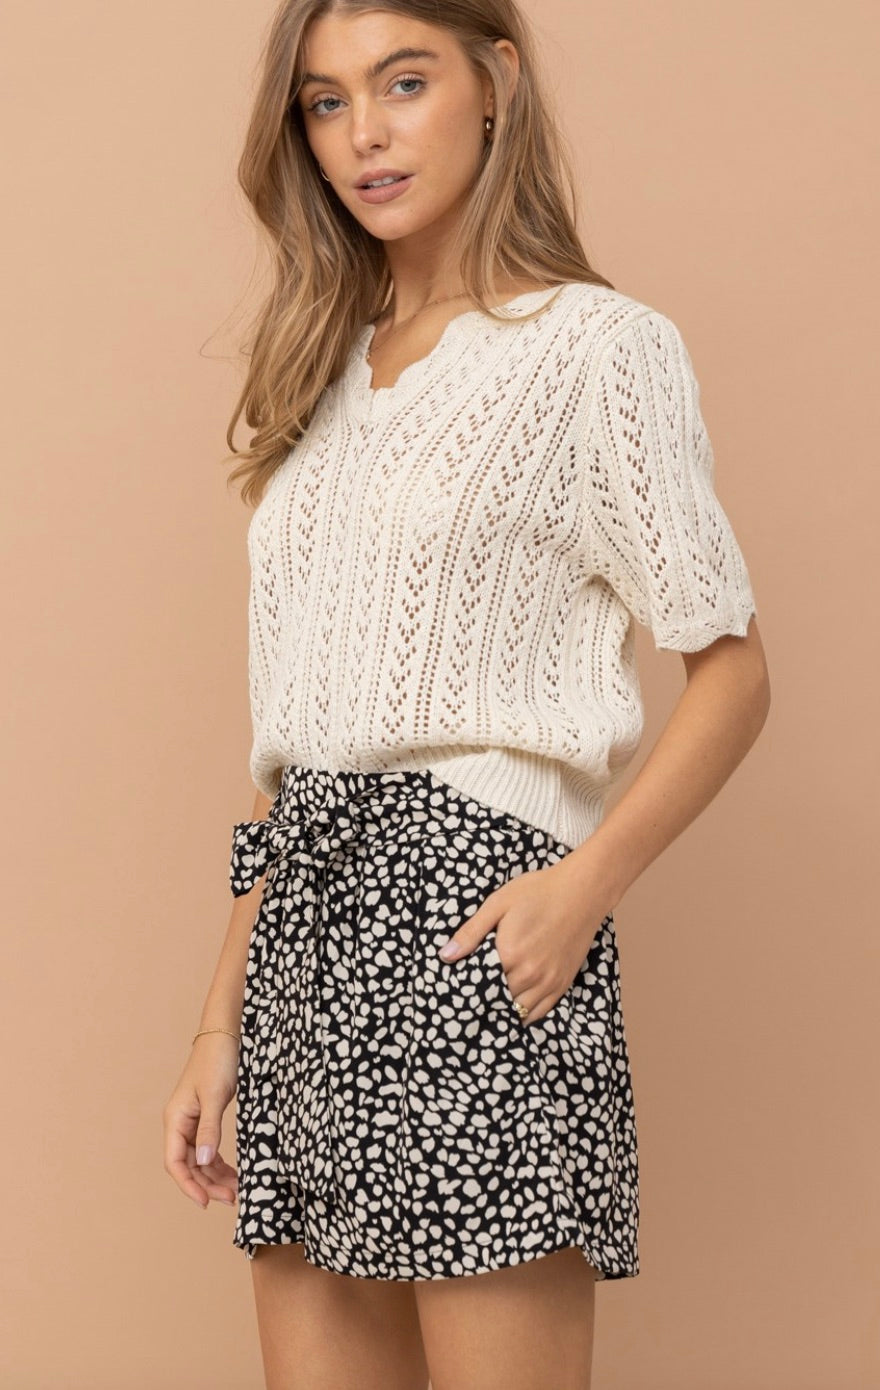 Chevron Knit Short Sleeve Top with Scallop Neckline - Lark & Lily Boutique